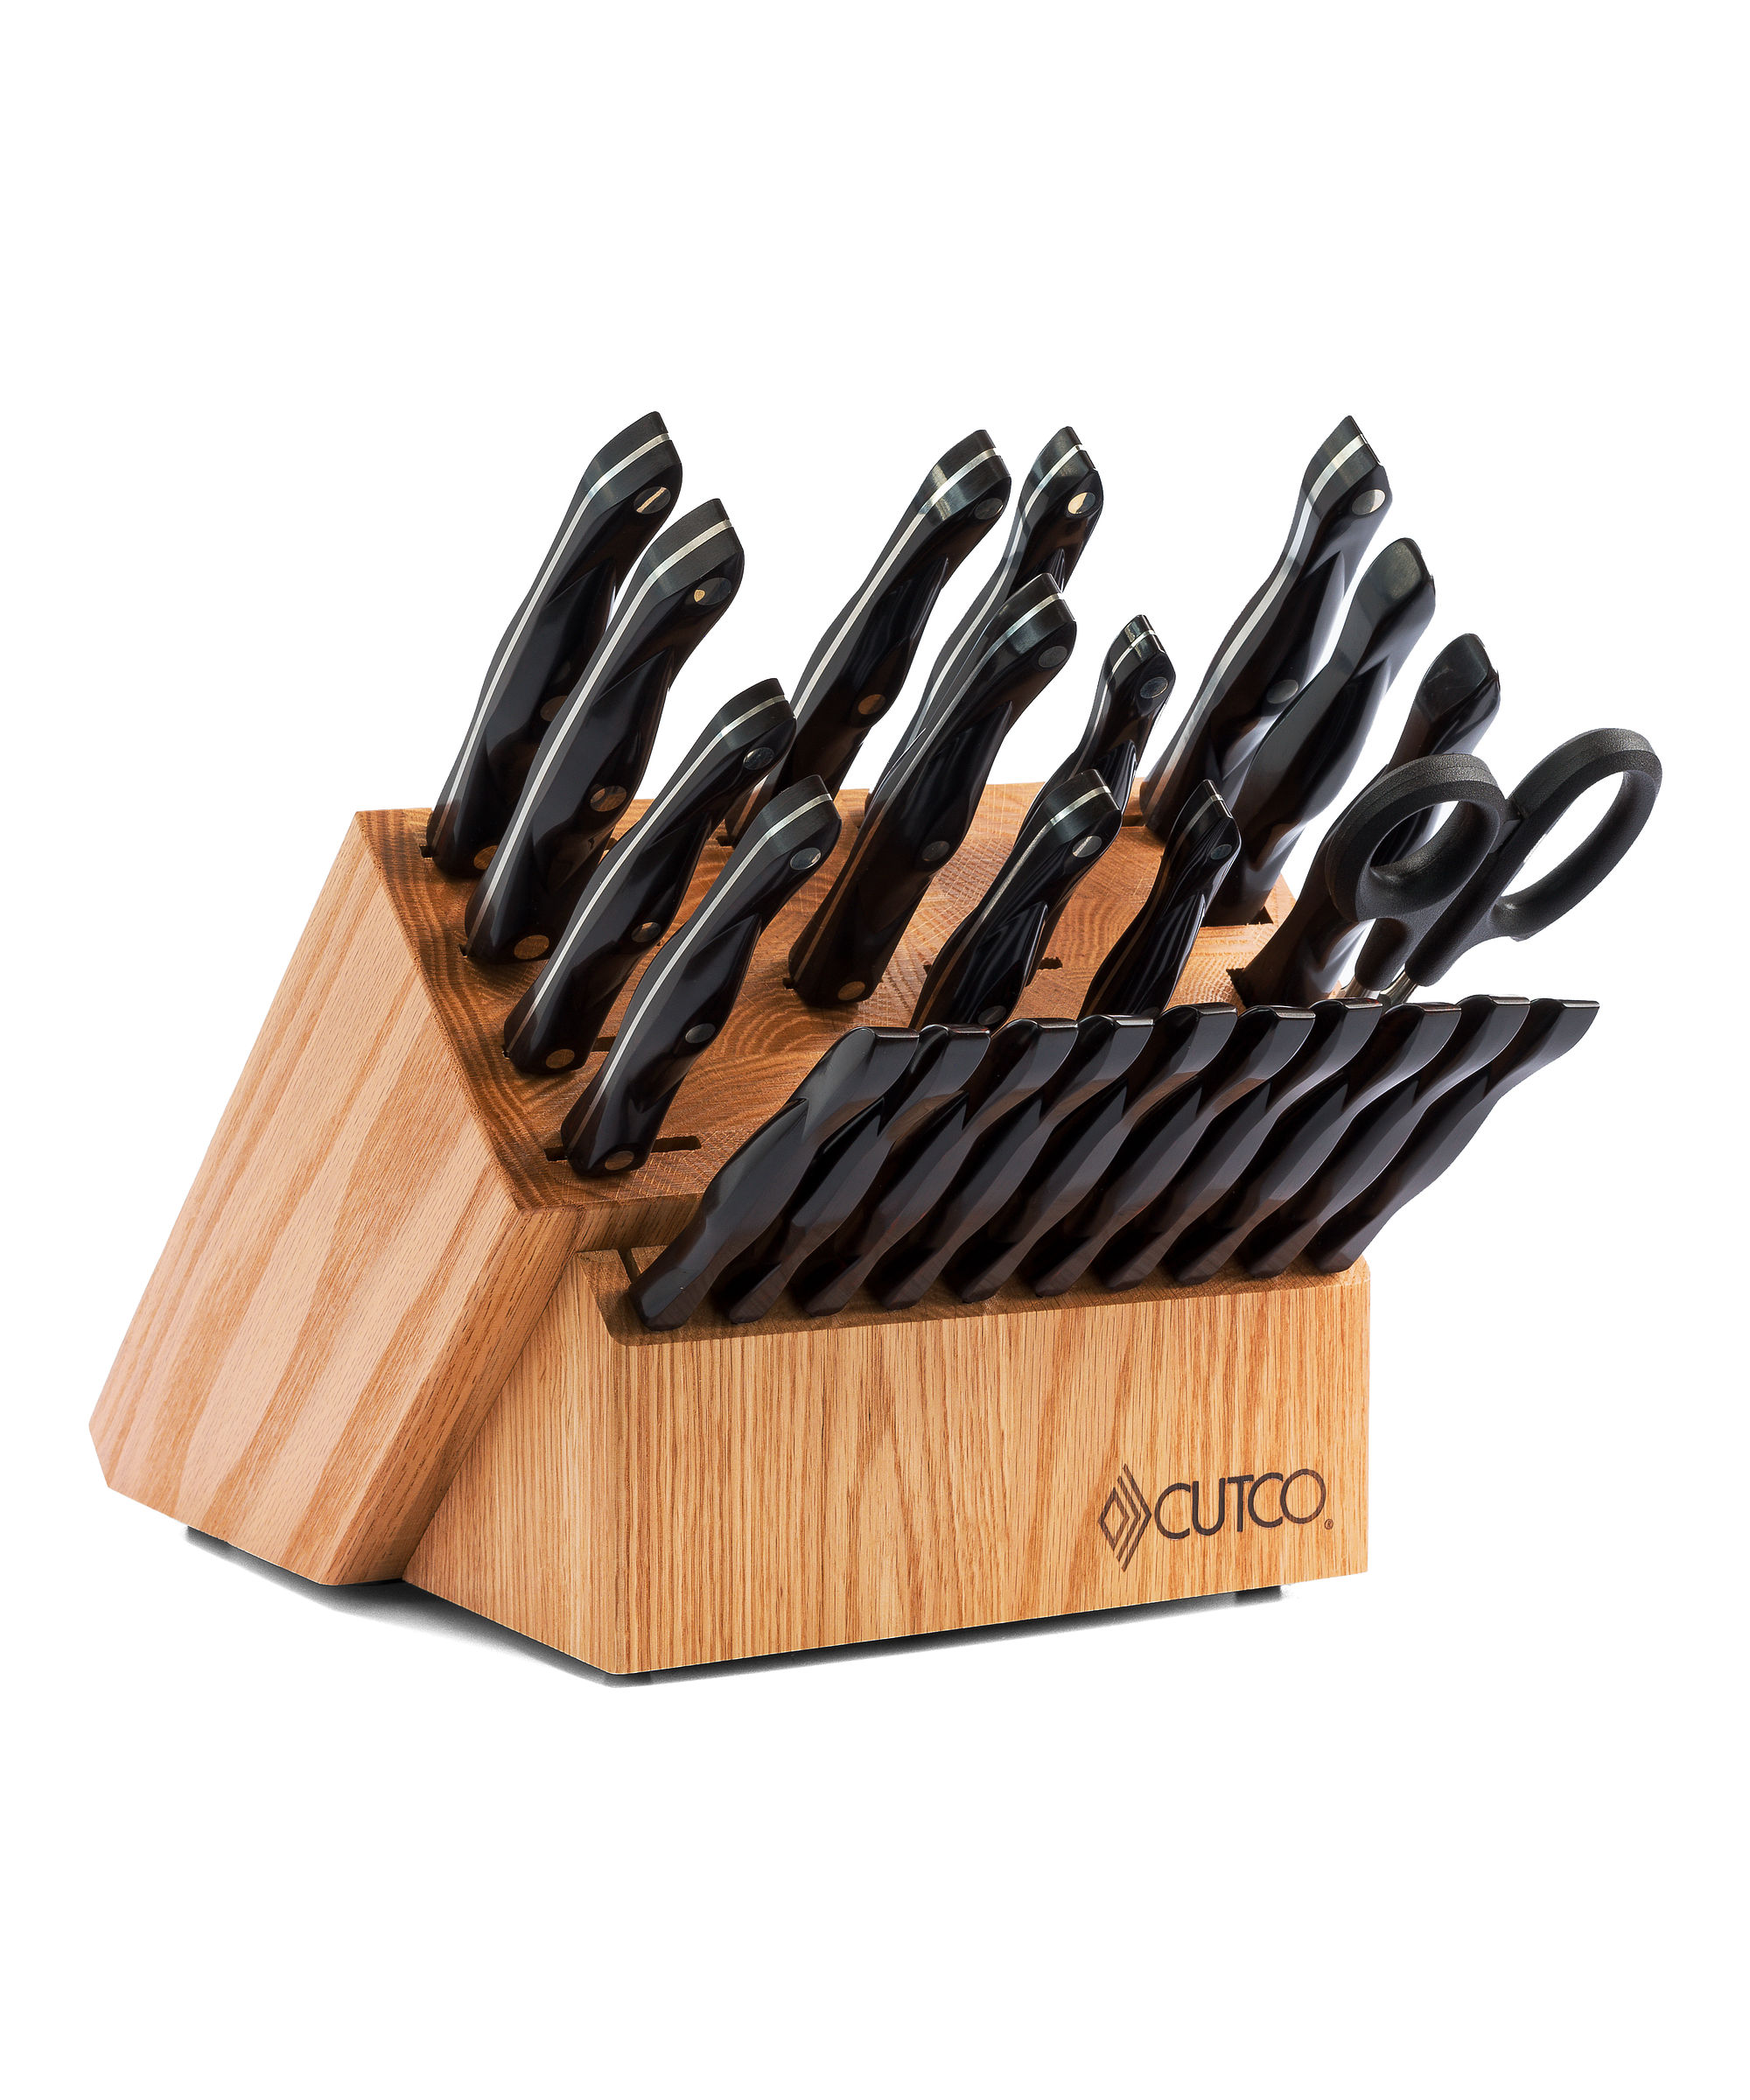 Galley + 6 Set with Block | 15 Pieces | Knife Block Sets by Cutco